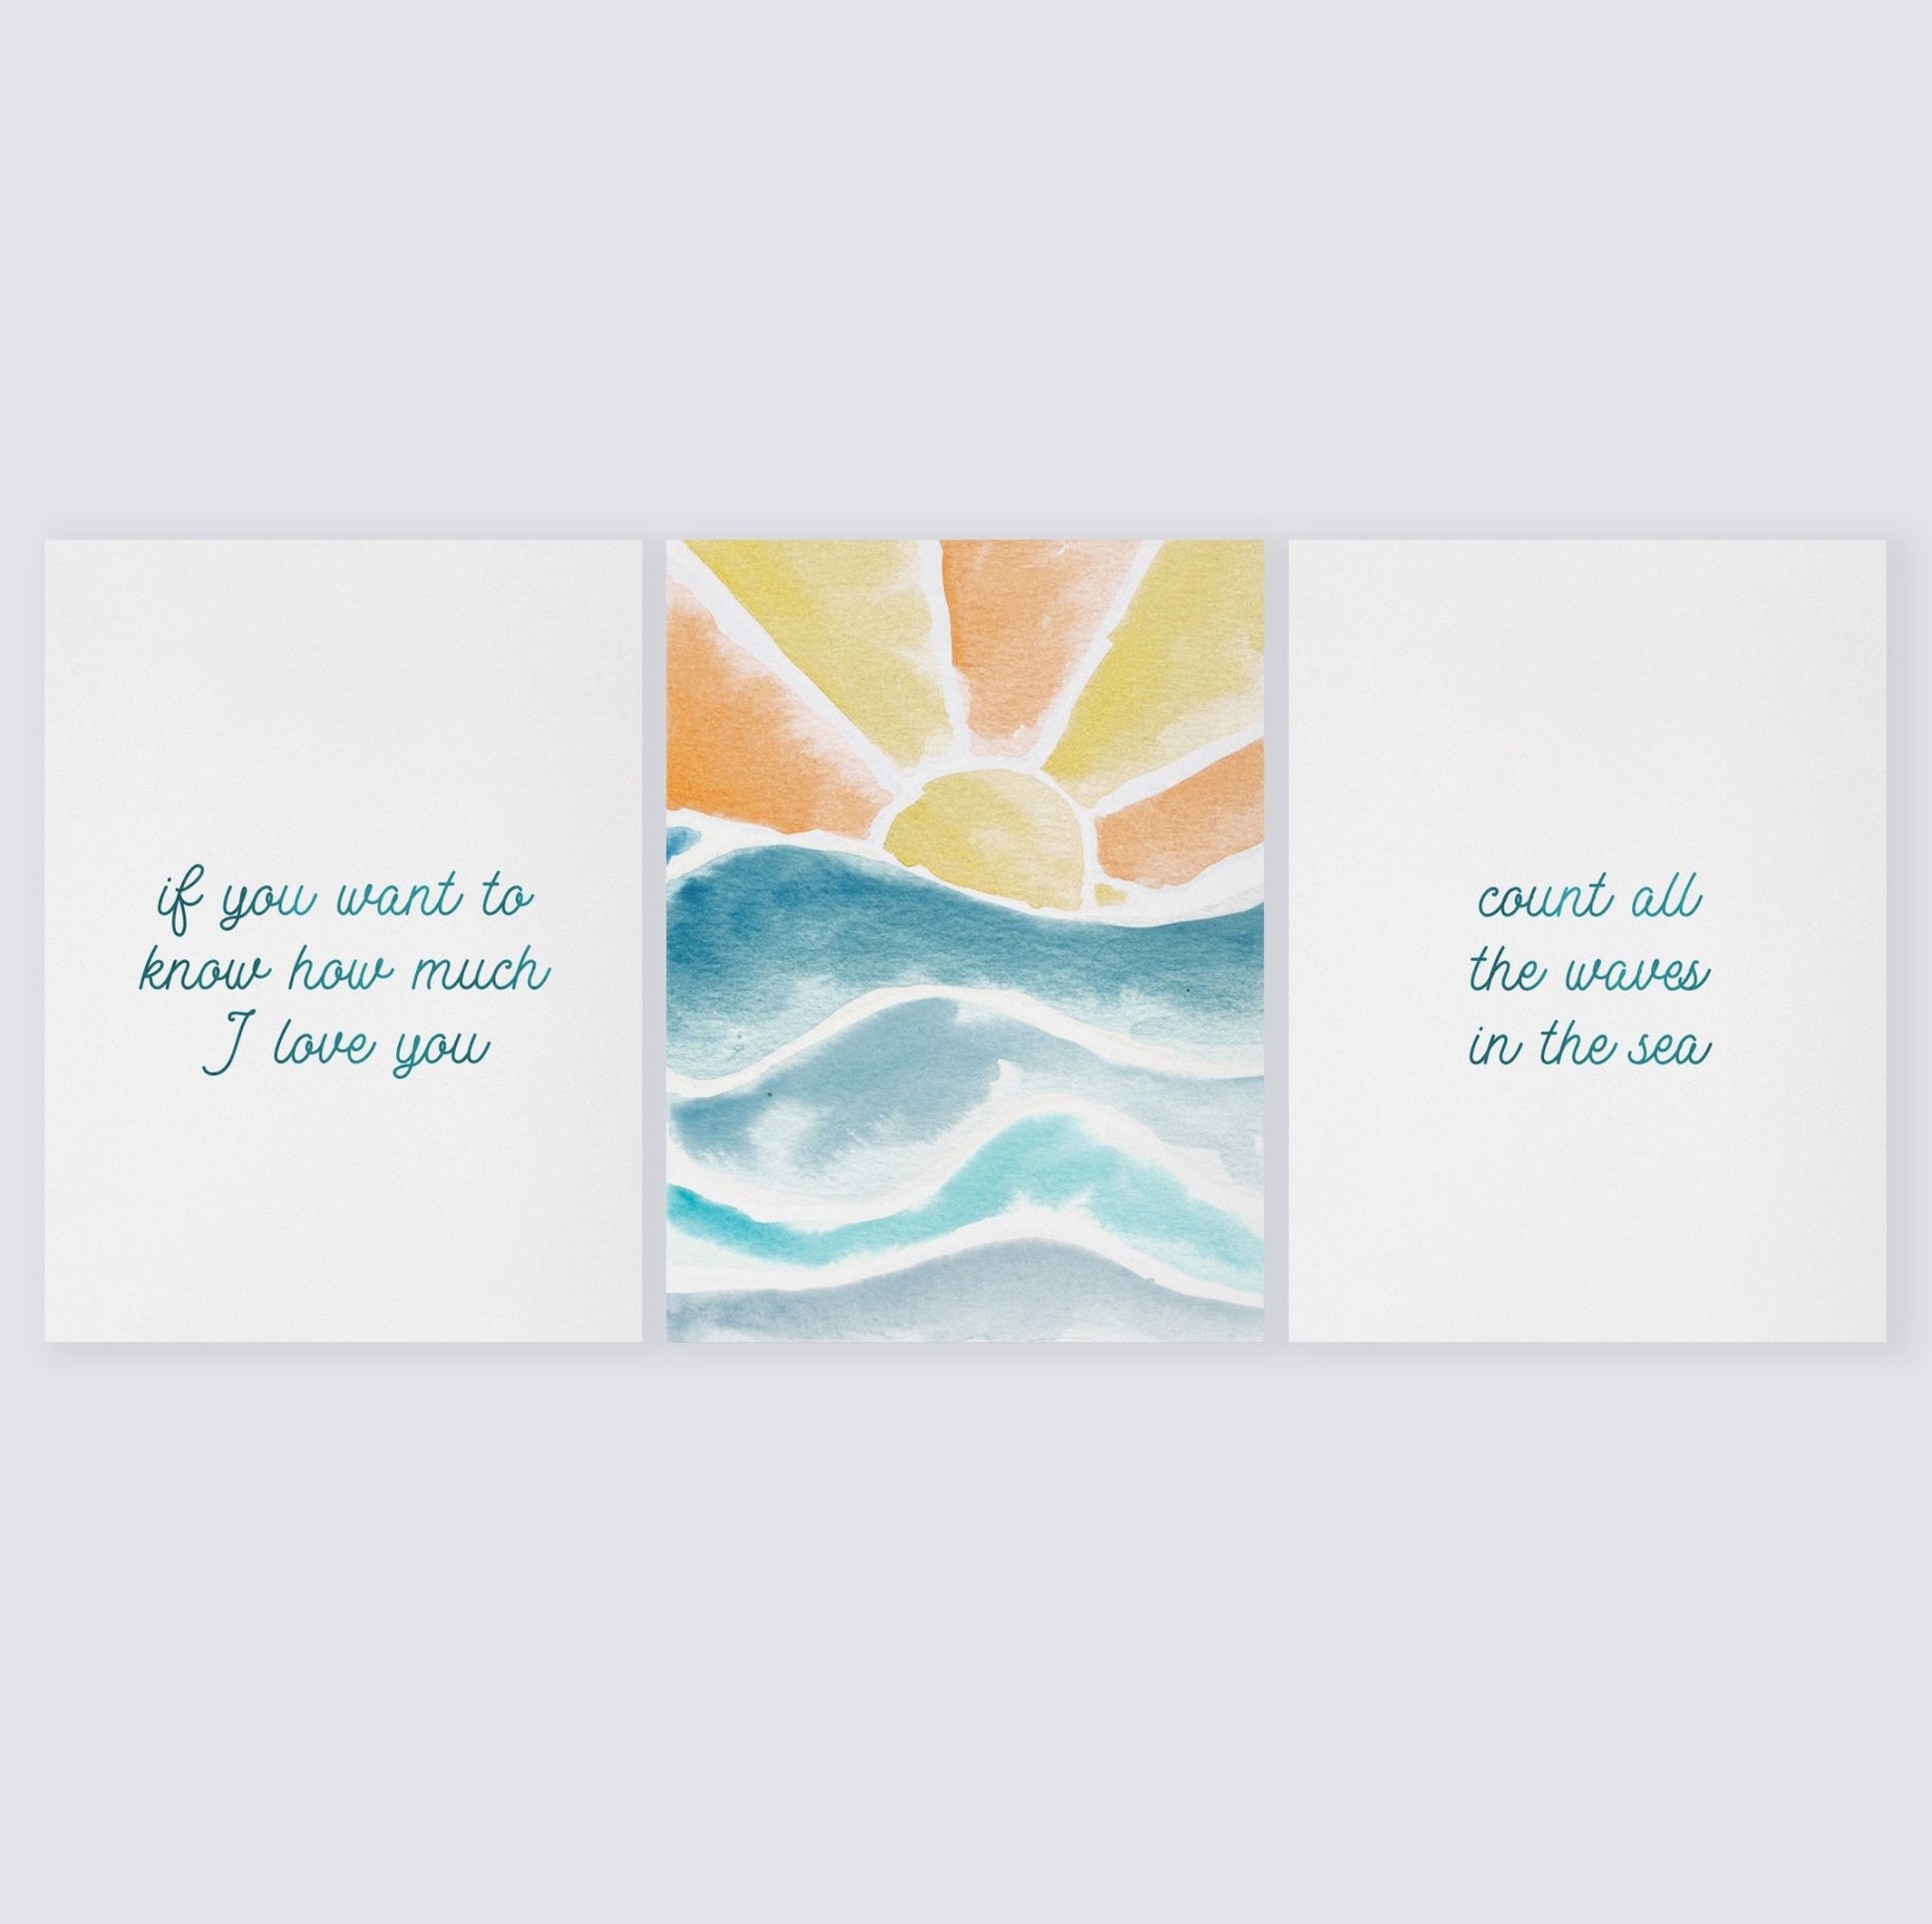 Count All The Waves 3 Print Set: Sunset on Water - Art Prints - Moon Rock Prints